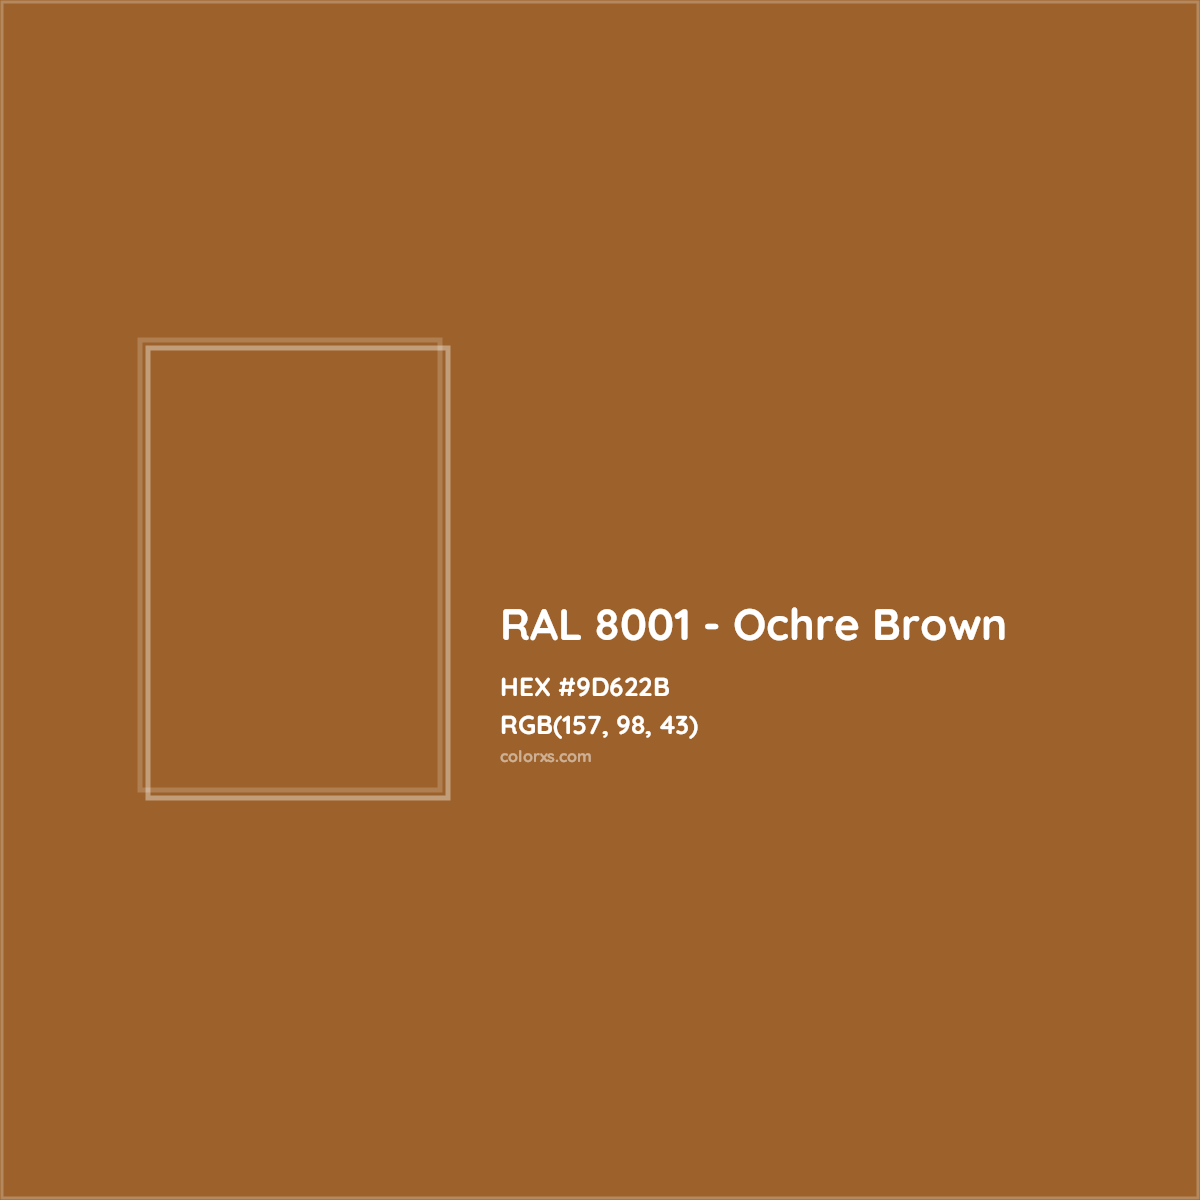 HEX #9D622B RAL 8001 - Ochre Brown CMS RAL Classic - Color Code